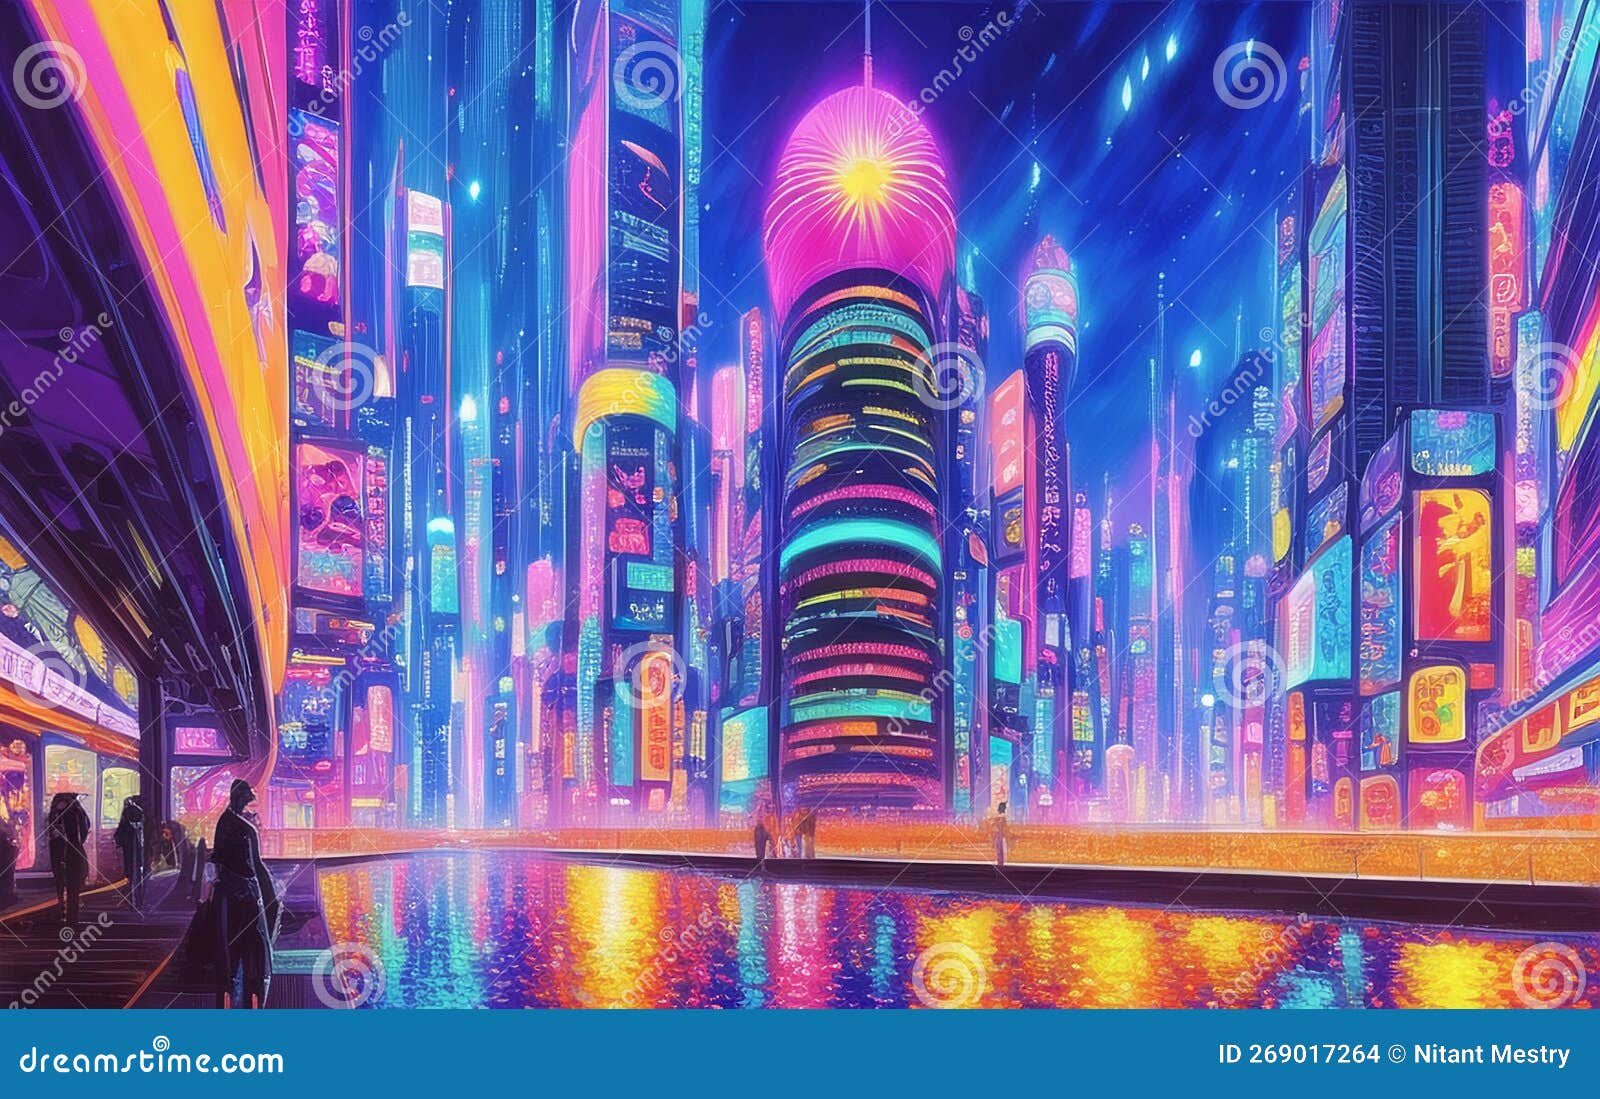 Cyberpunk Anime Science Fiction 4k Wallpaper,HD Anime Wallpapers,4k  Wallpapers,Images,Backgrounds,Photos and Pictures